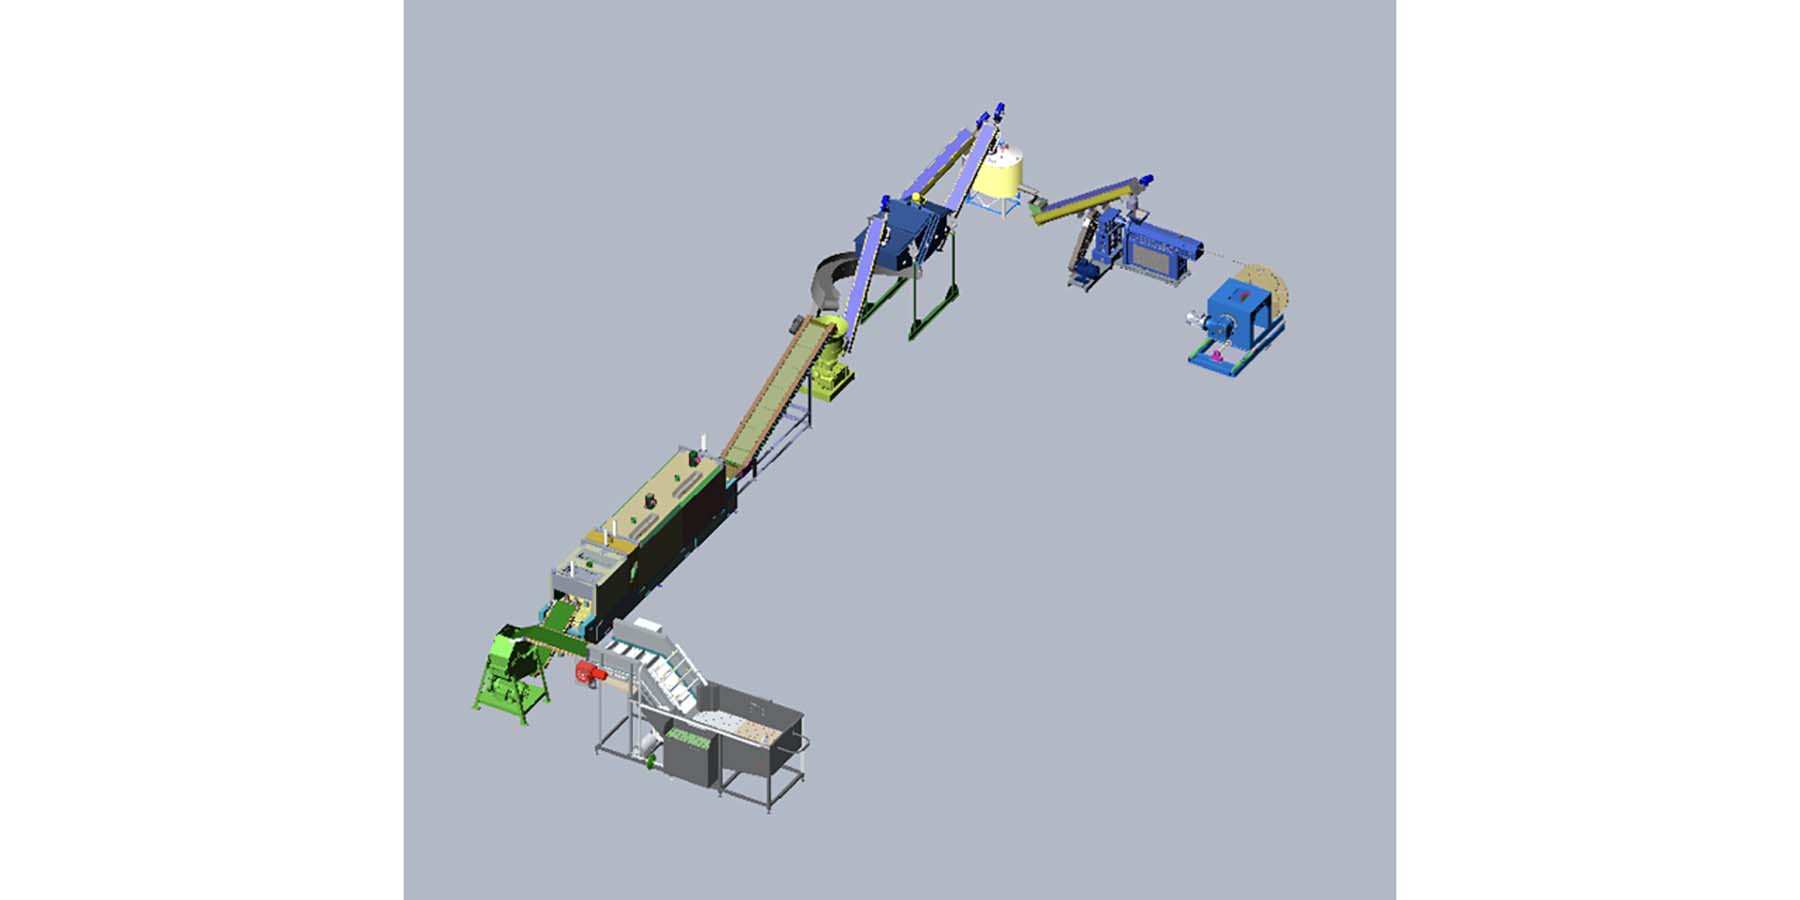 This is a CAD modelled production line that can theoretically mass manufacture coconut filament from fresh coconut waste